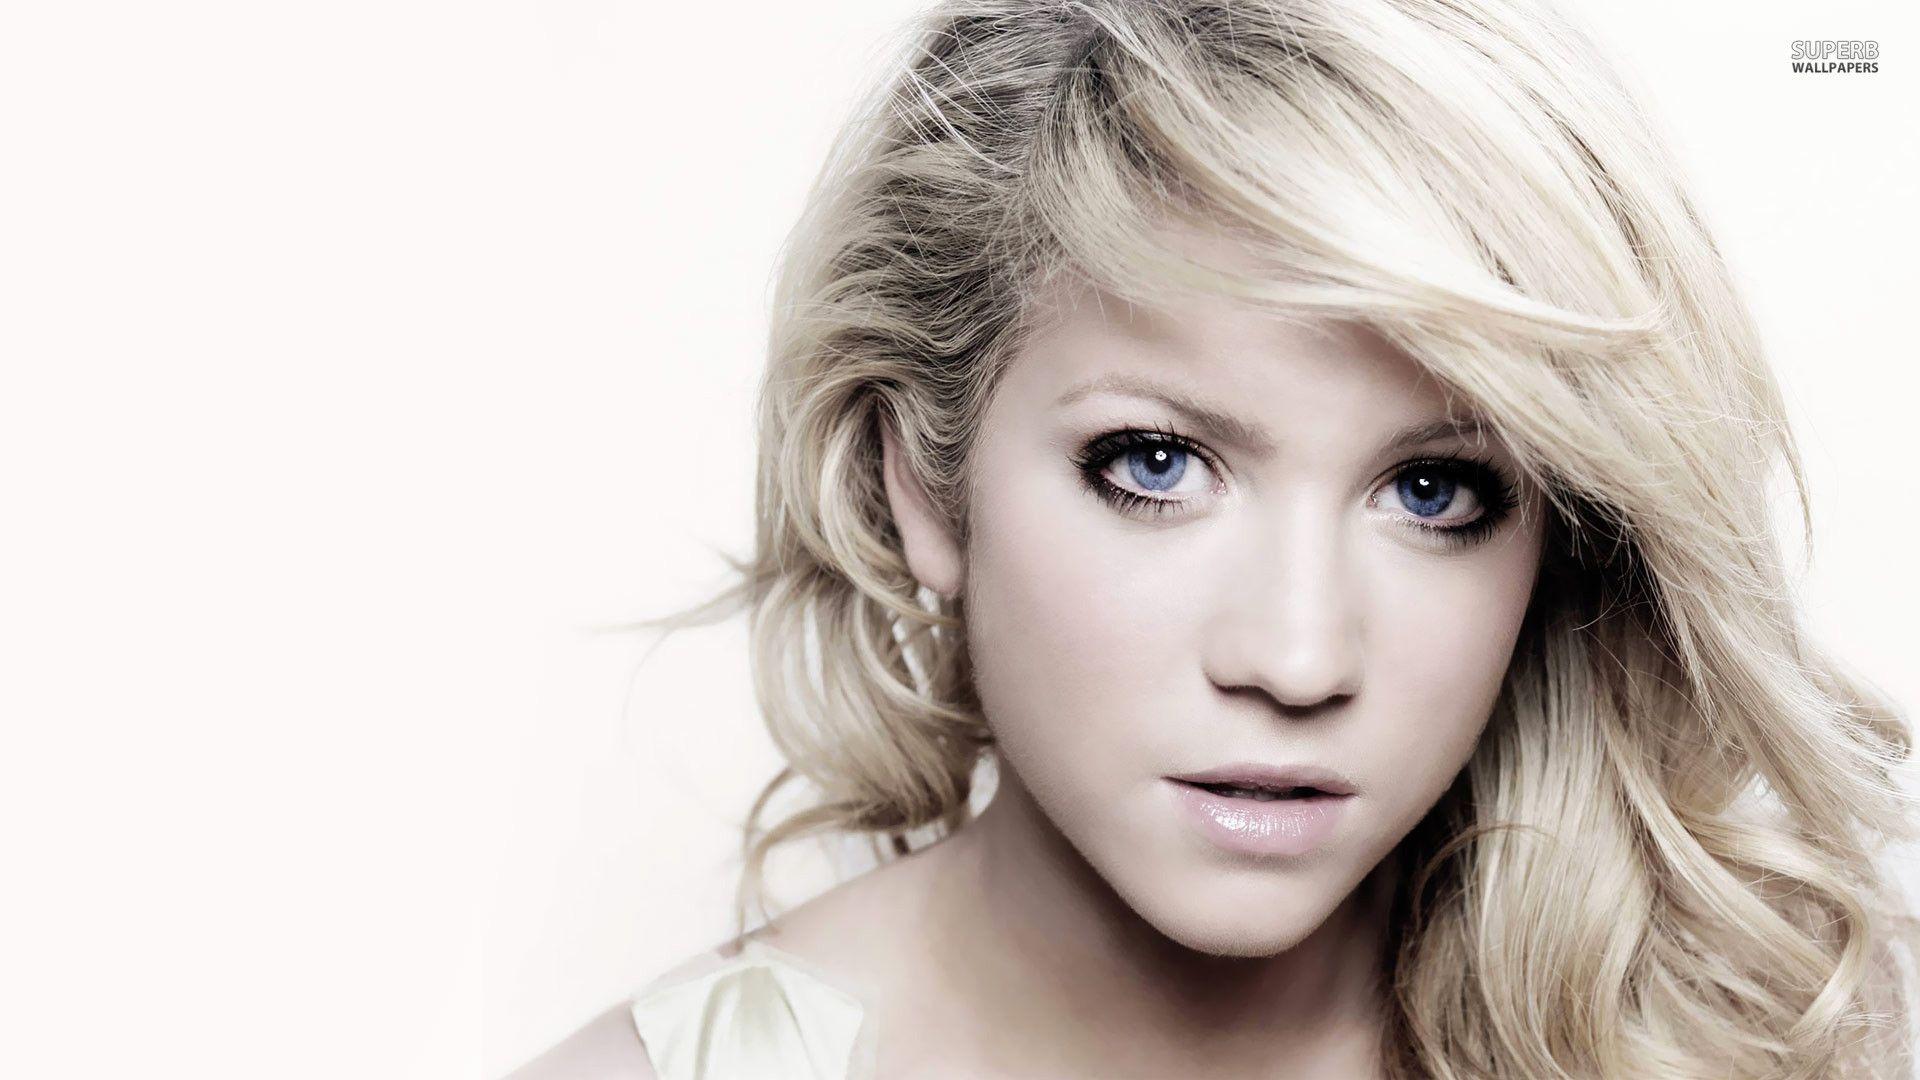 Brittany Snow wallpaper